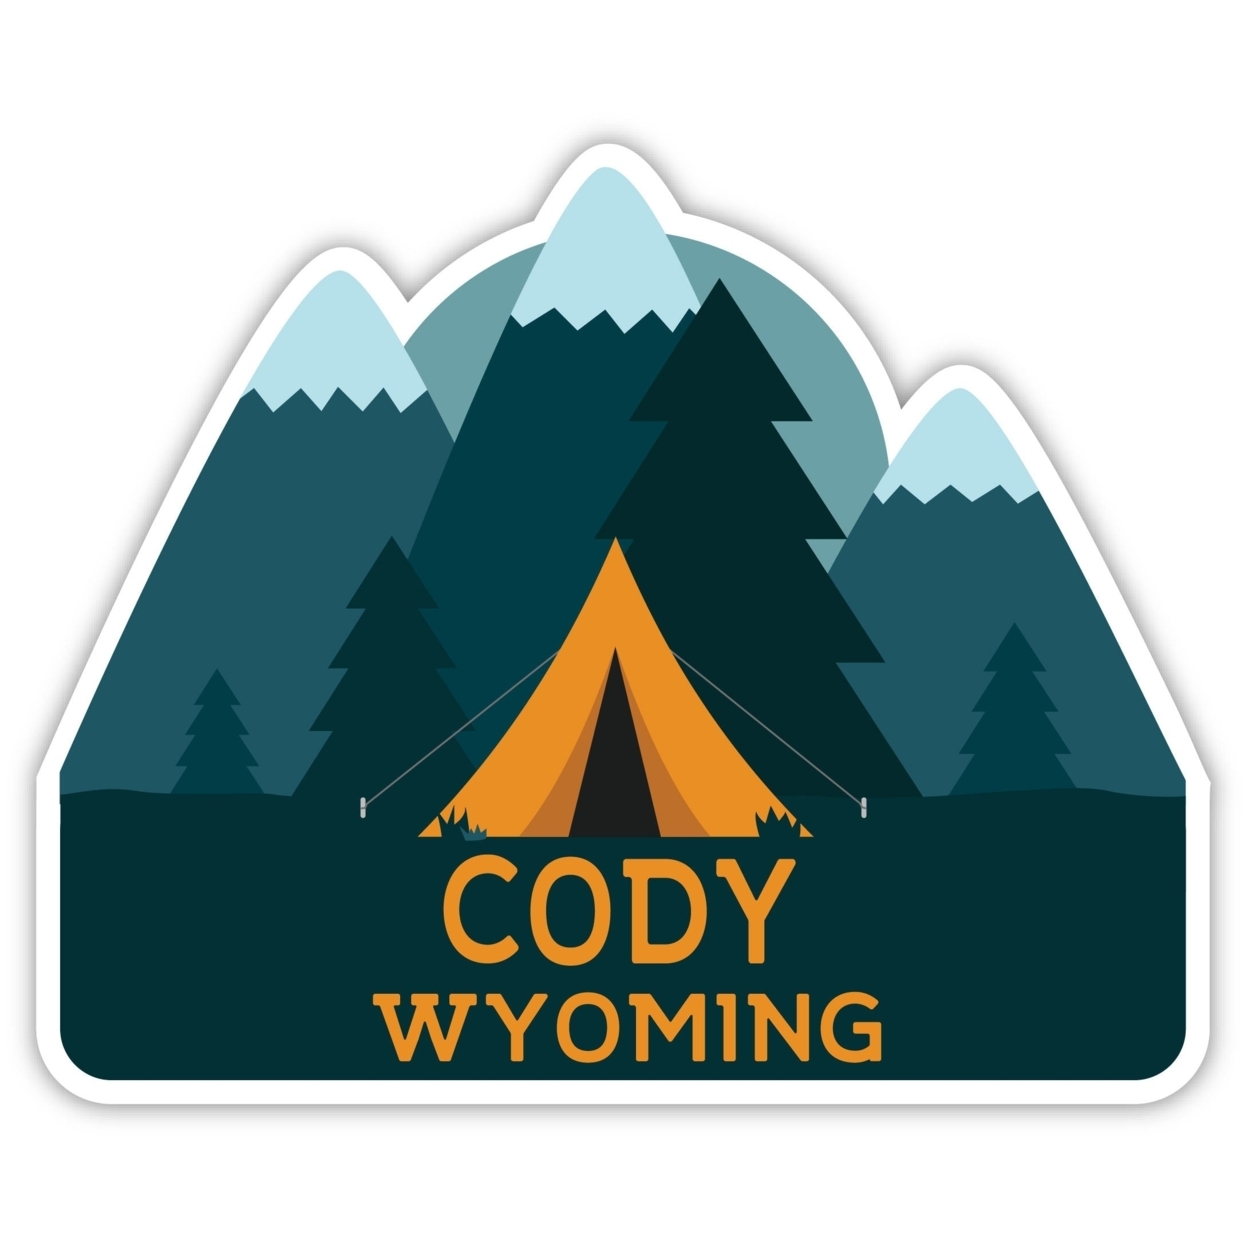 Cody Wyoming Souvenir Decorative Stickers (Choose Theme And Size) - 4-Pack, 2-Inch, Tent